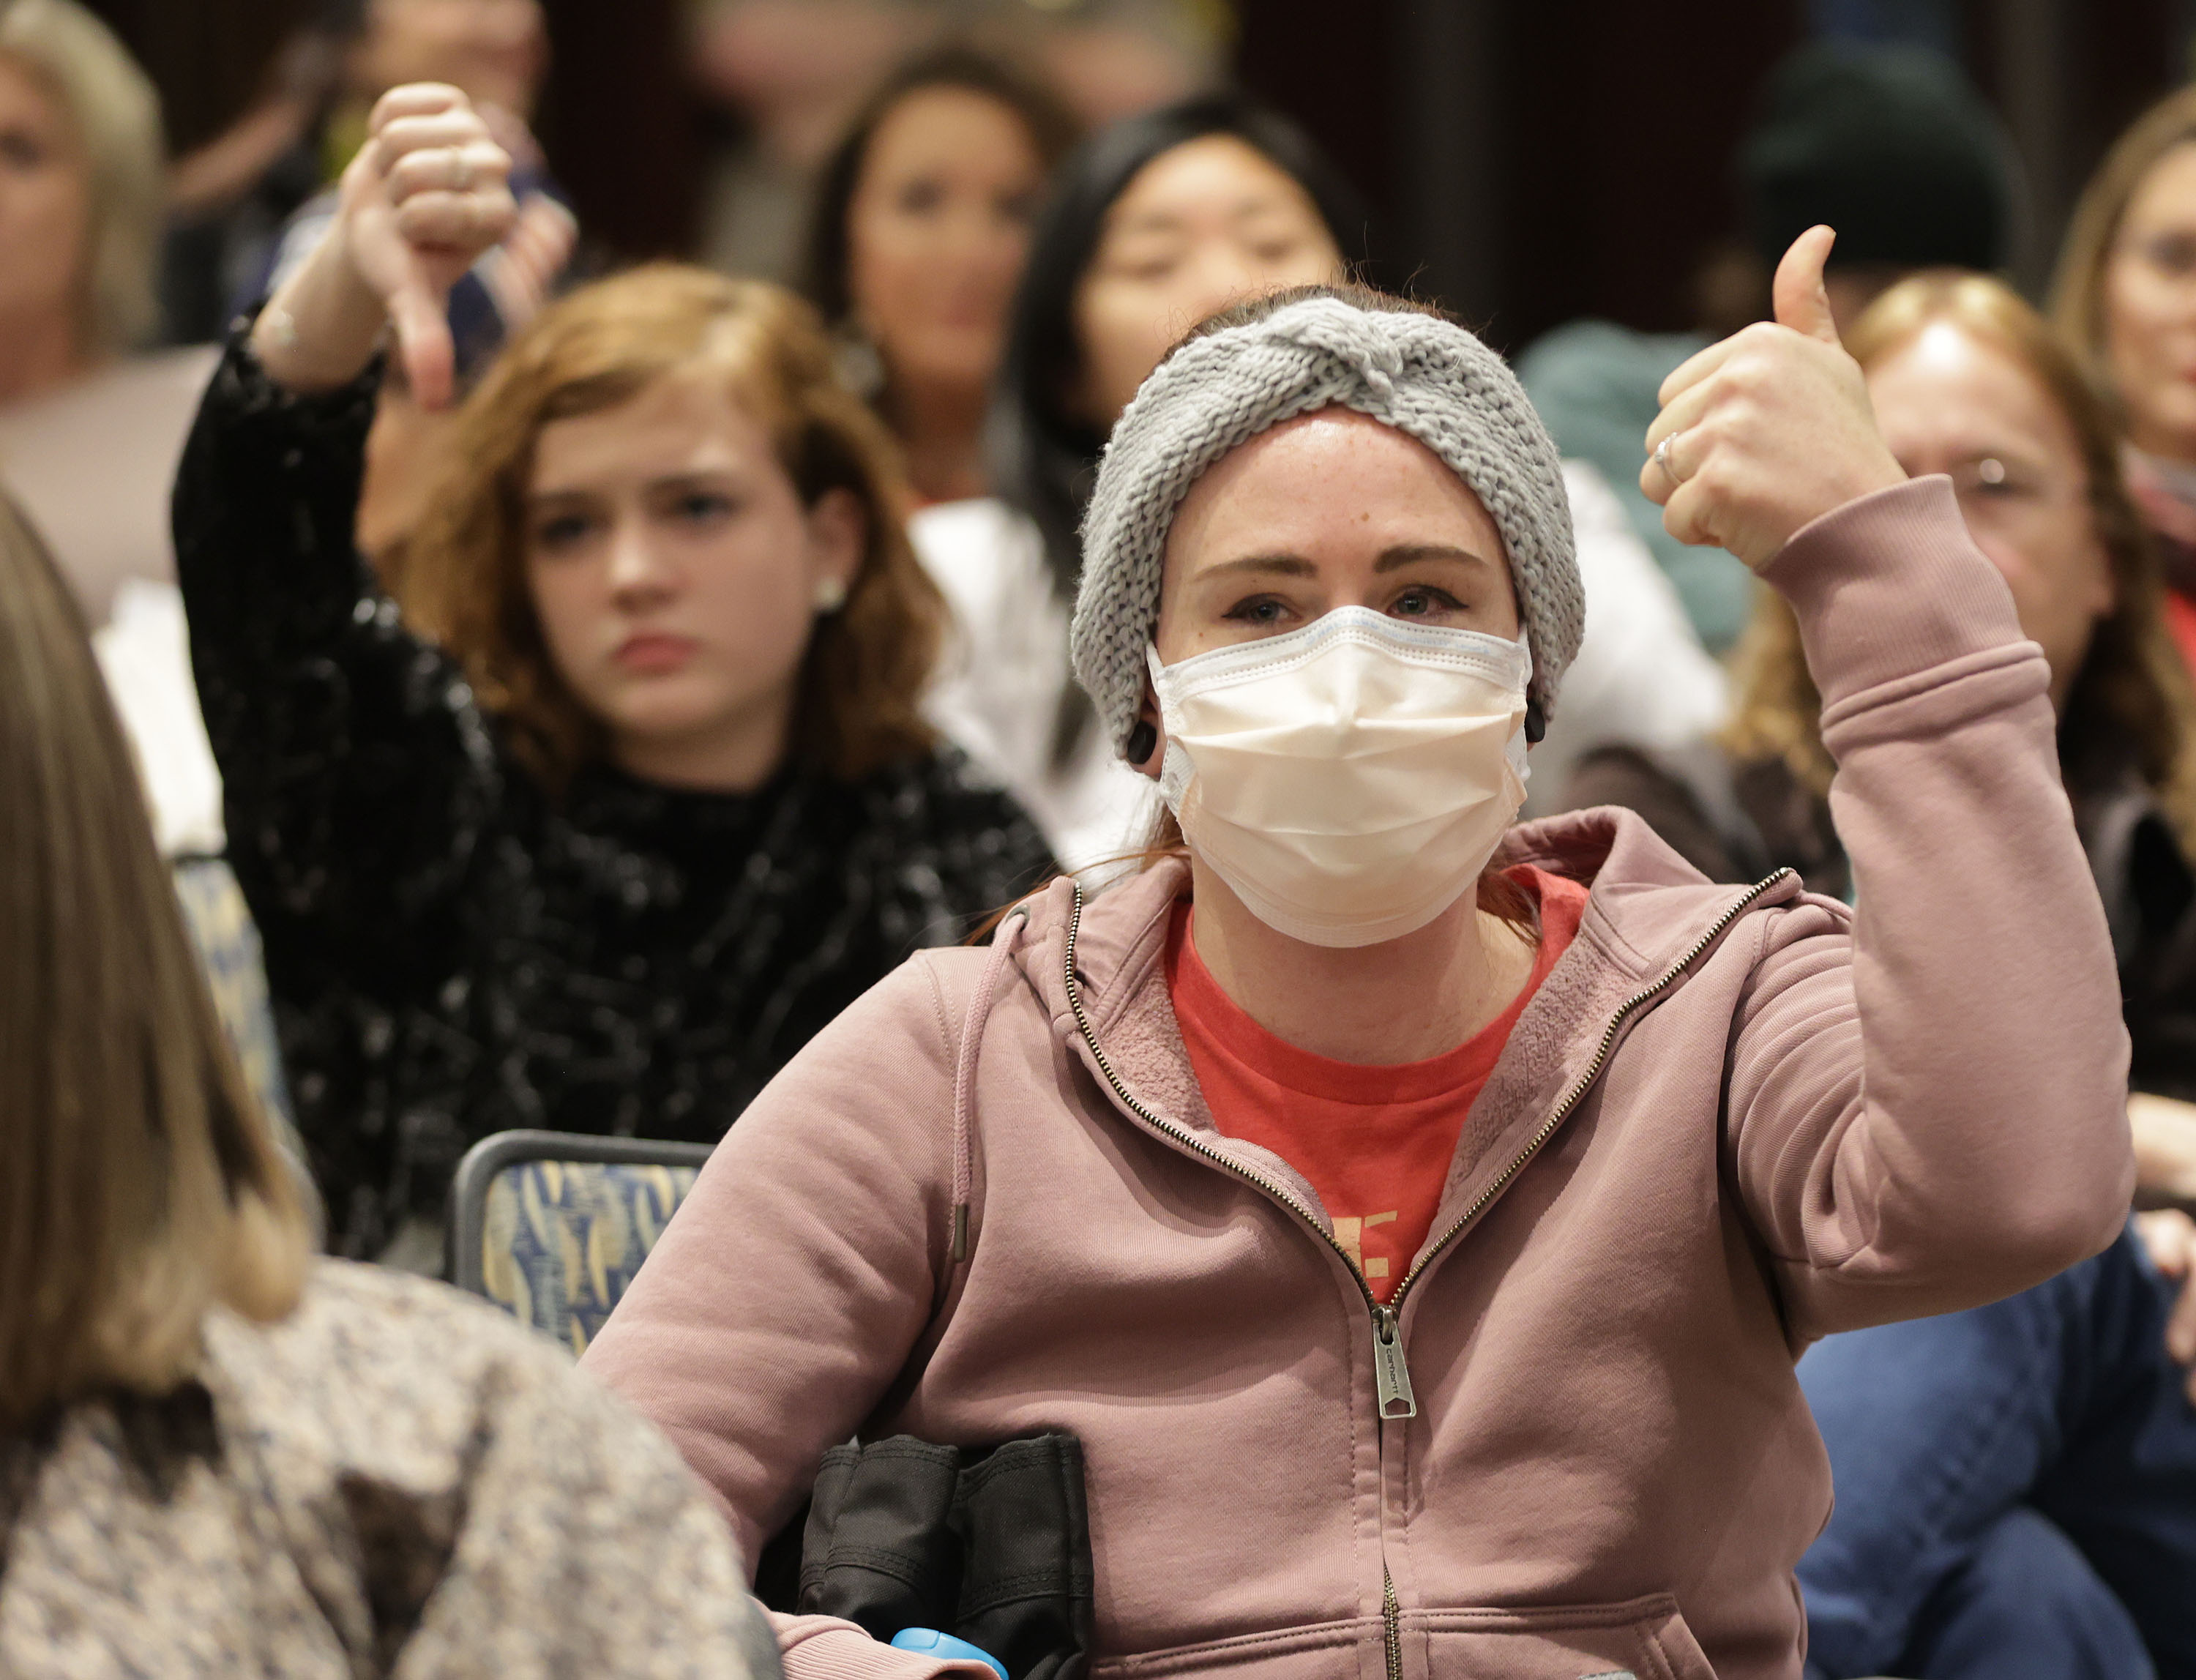 Health care worker Jeni West gives a thumbs-up as the Salt Lake County Council voted in Salt Lake City on Thursday, Jan. 13, 2022. The council left a 30-day county mask order in place.